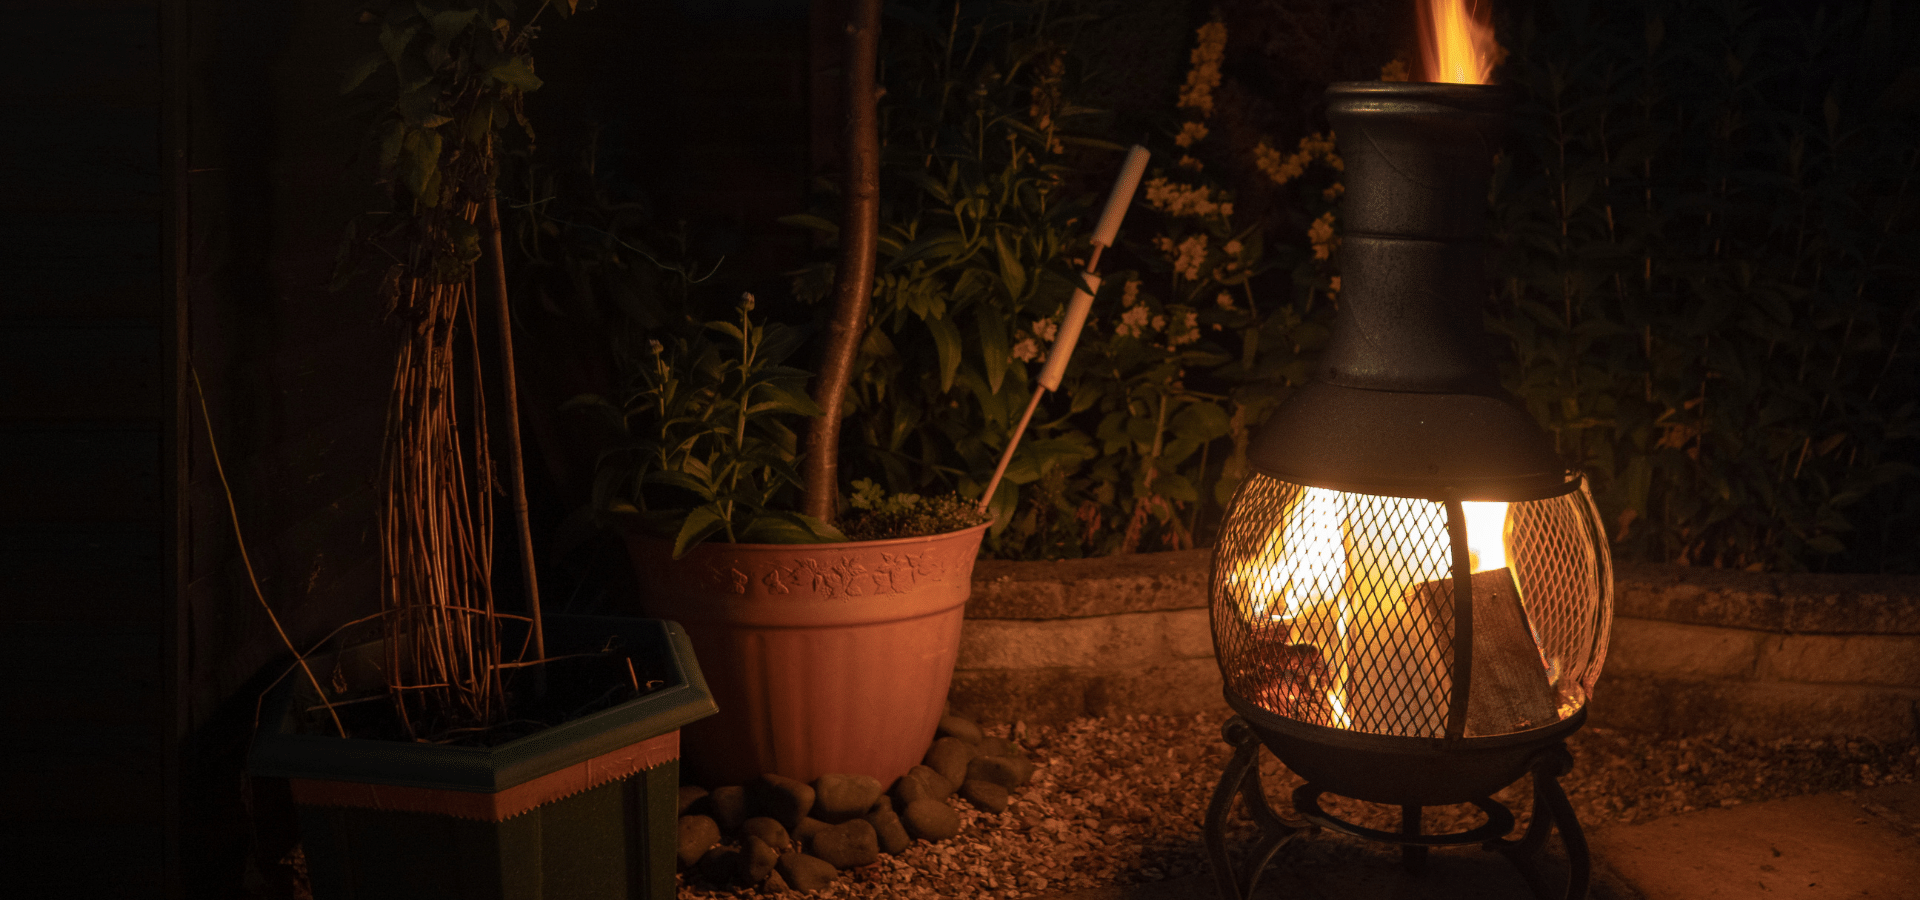 The Different Types of Chimenea: Which One is Best?